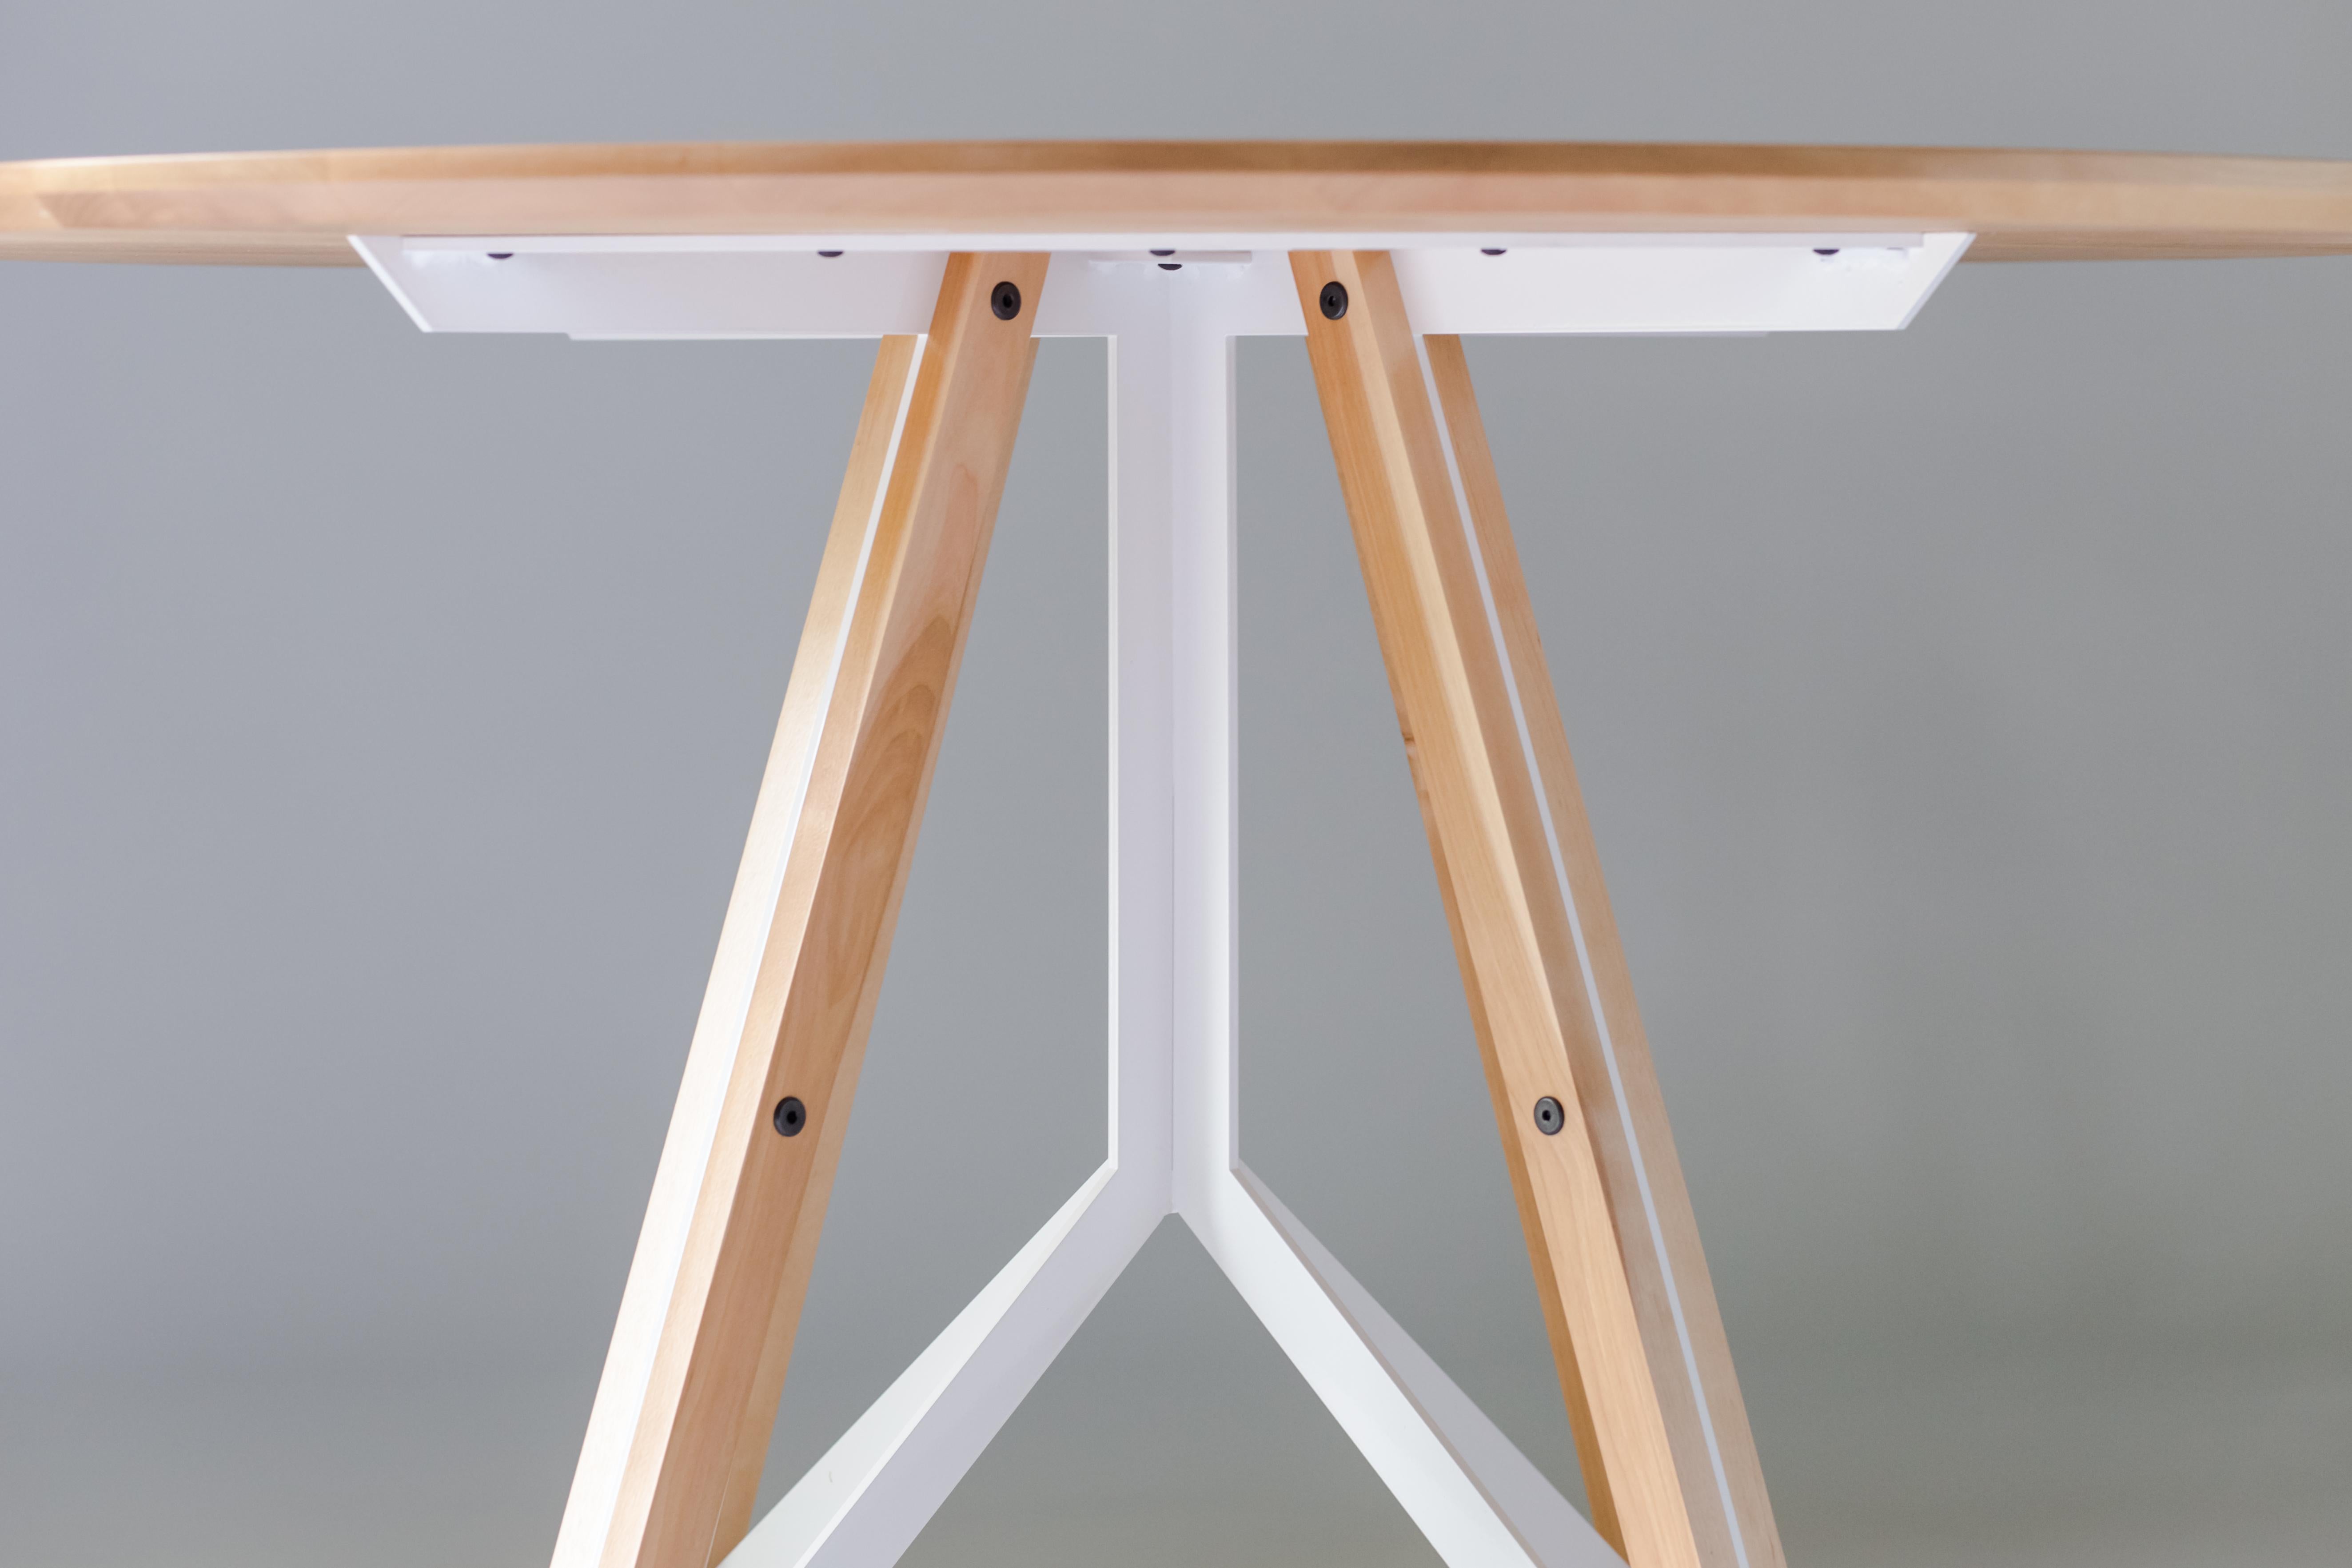 The Trestle - modern birch and powder coated steel round dining table 

Made from solid birch and welded steel, the Trestle takes inspiration from classic bridge construction and the Iconic works of Gustave Eiffel. The steel base structure is